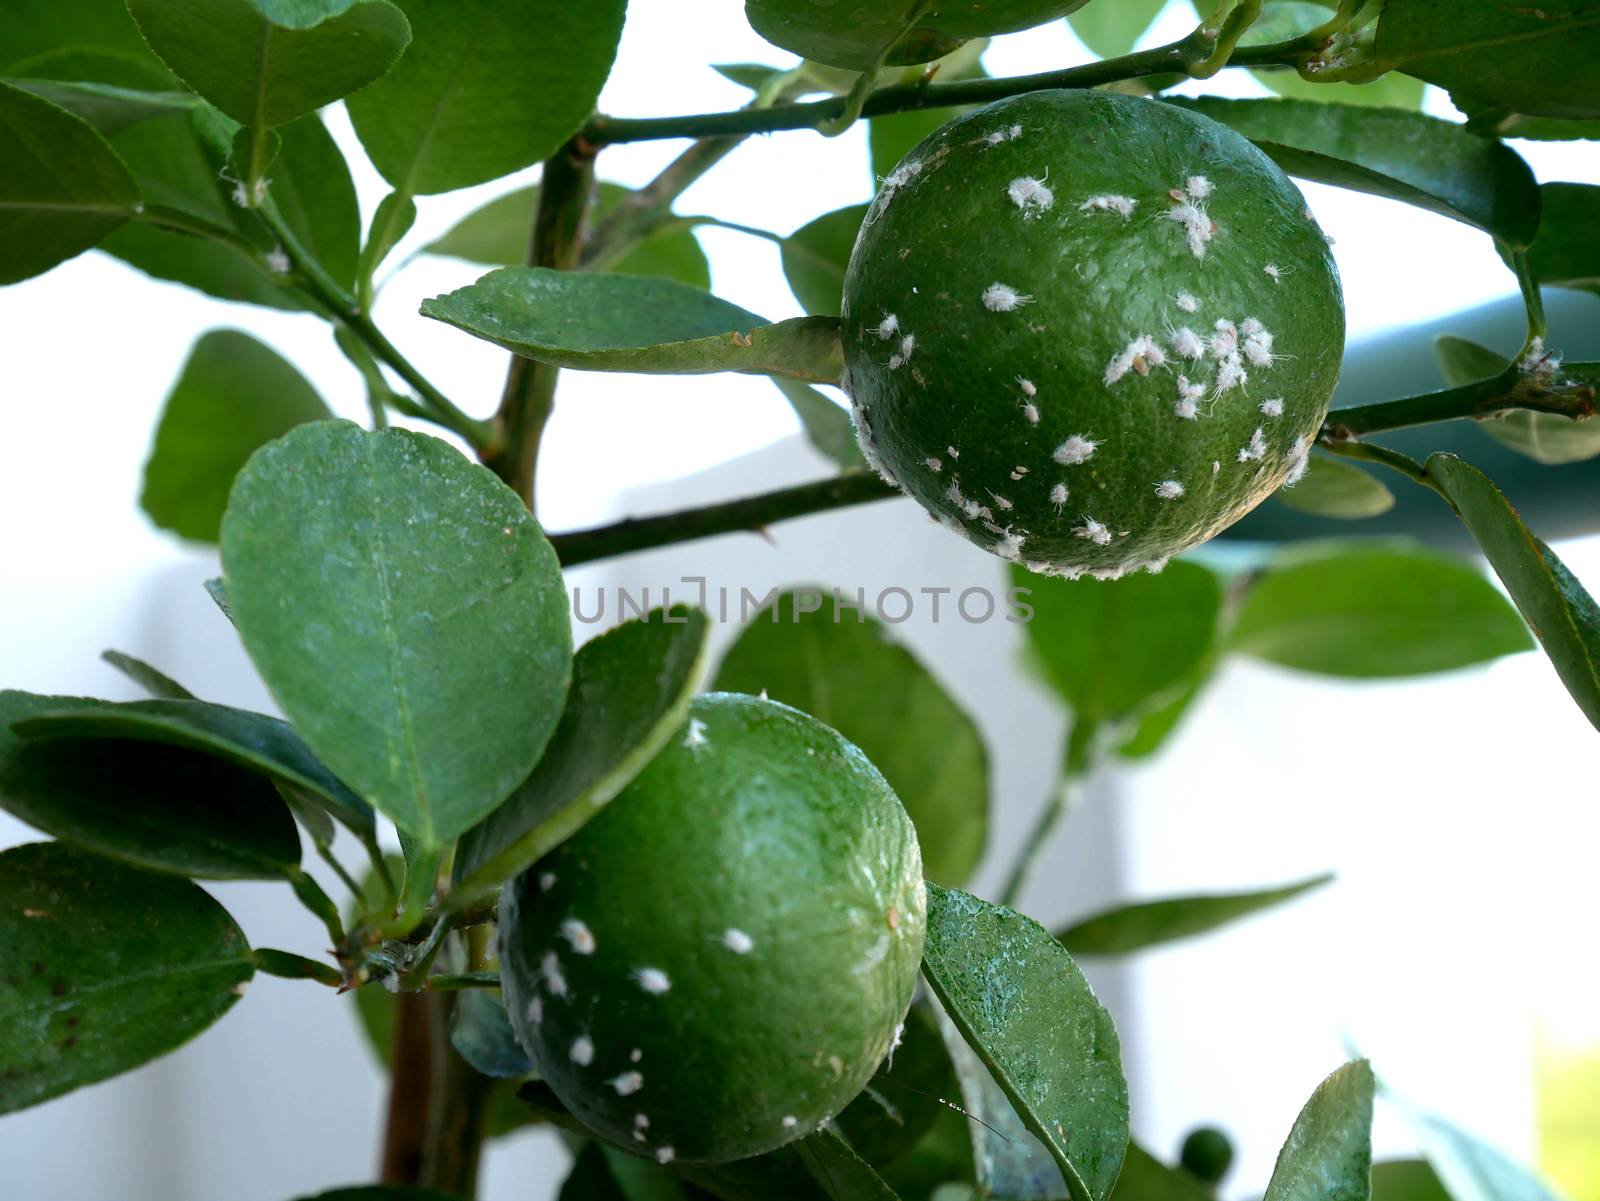 Mealybugs, considered pests on lemon tree. Mealybugs are insects in the family Pseudococcidae by asiandelight